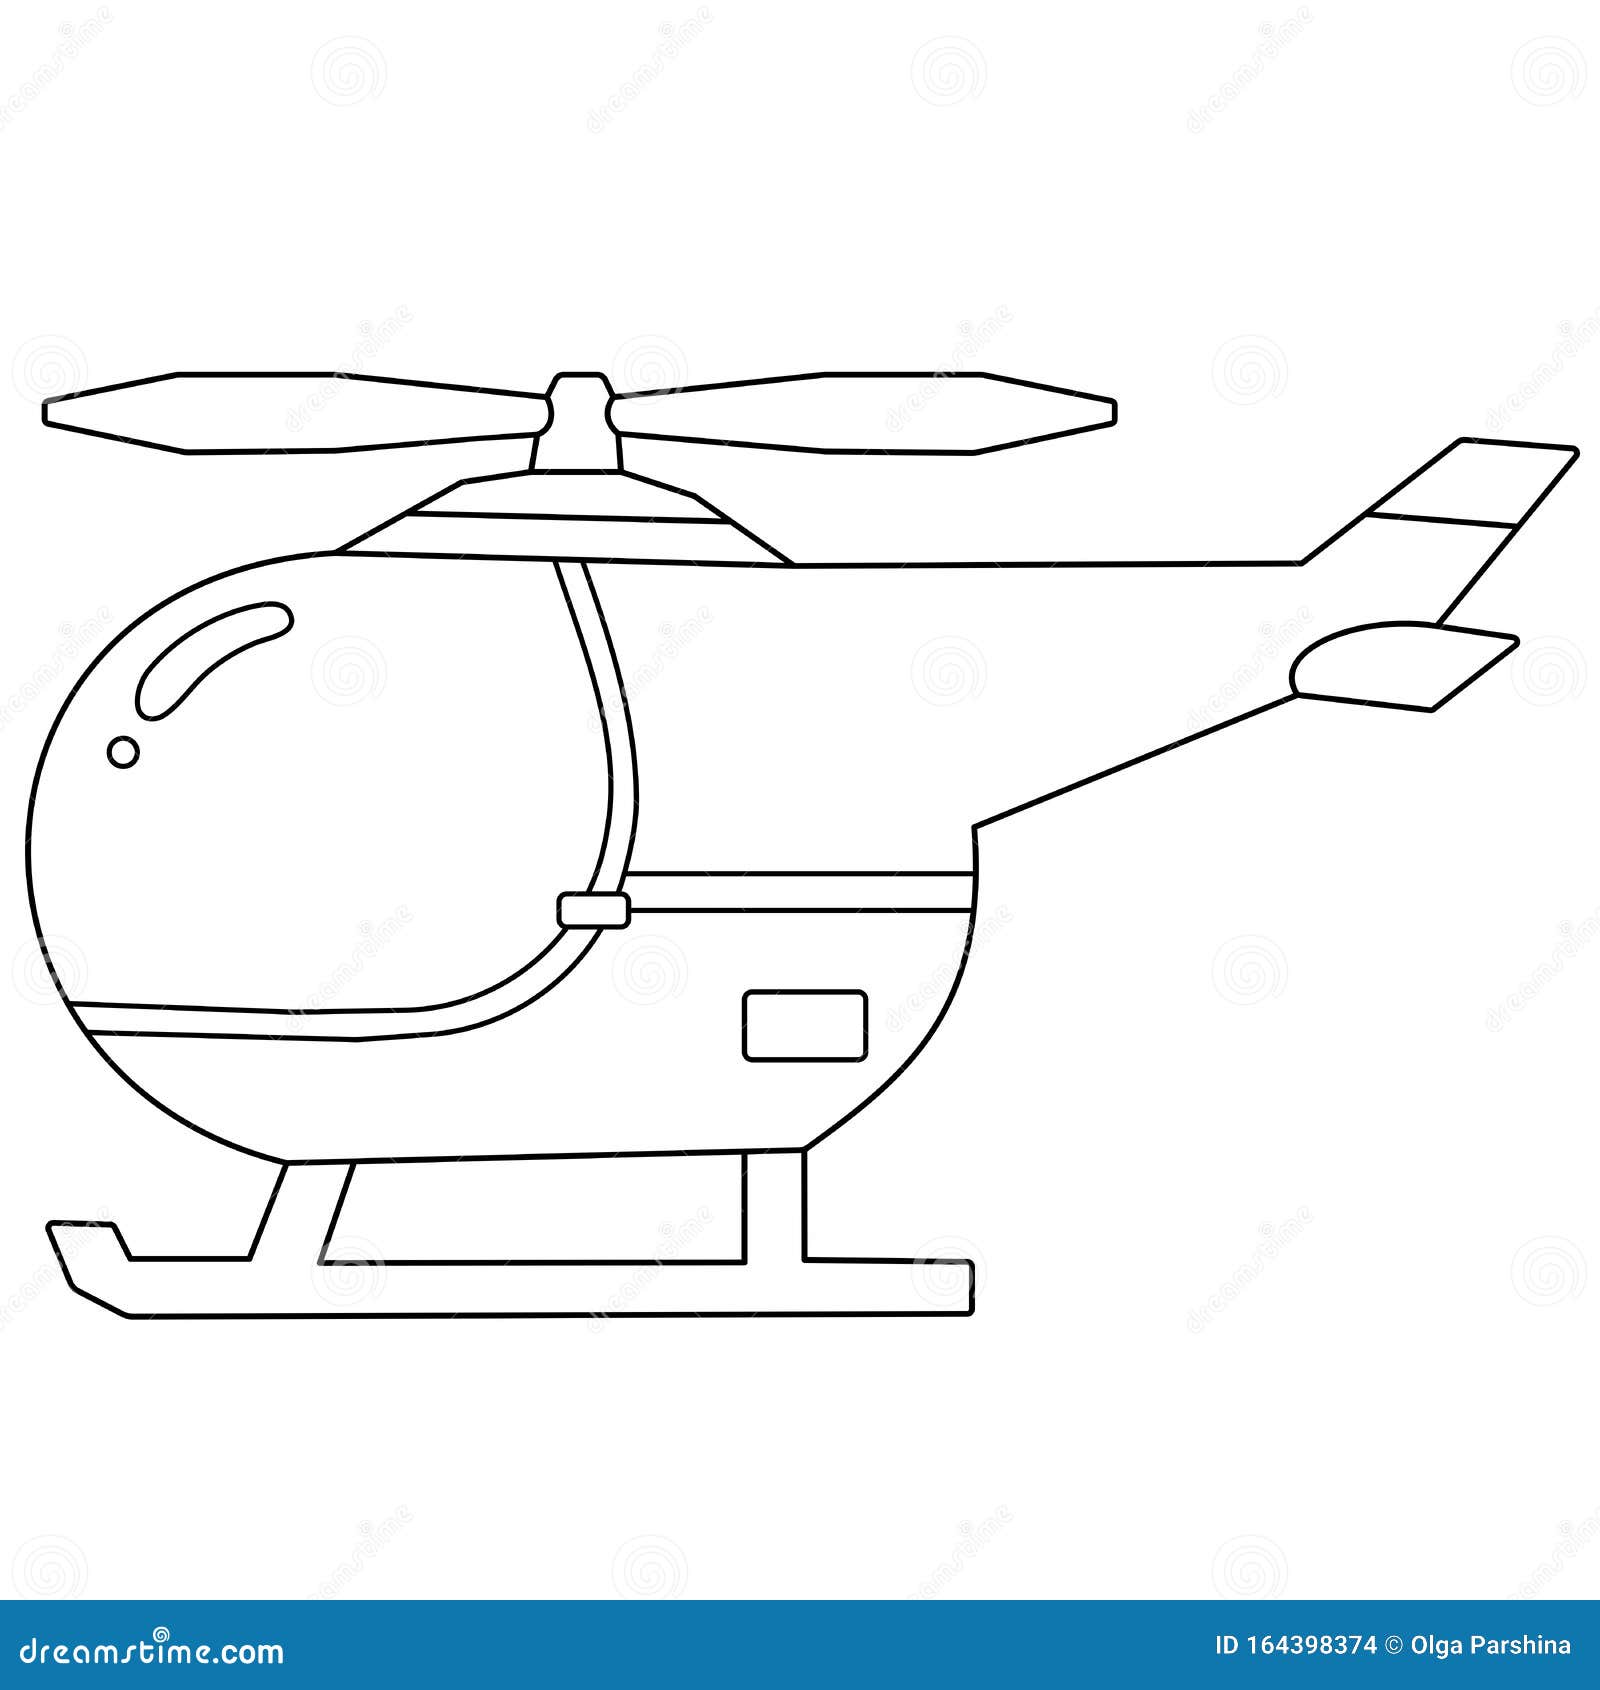 Coloring Page Outline of Cartoon Helicopter. Images of Transport ...